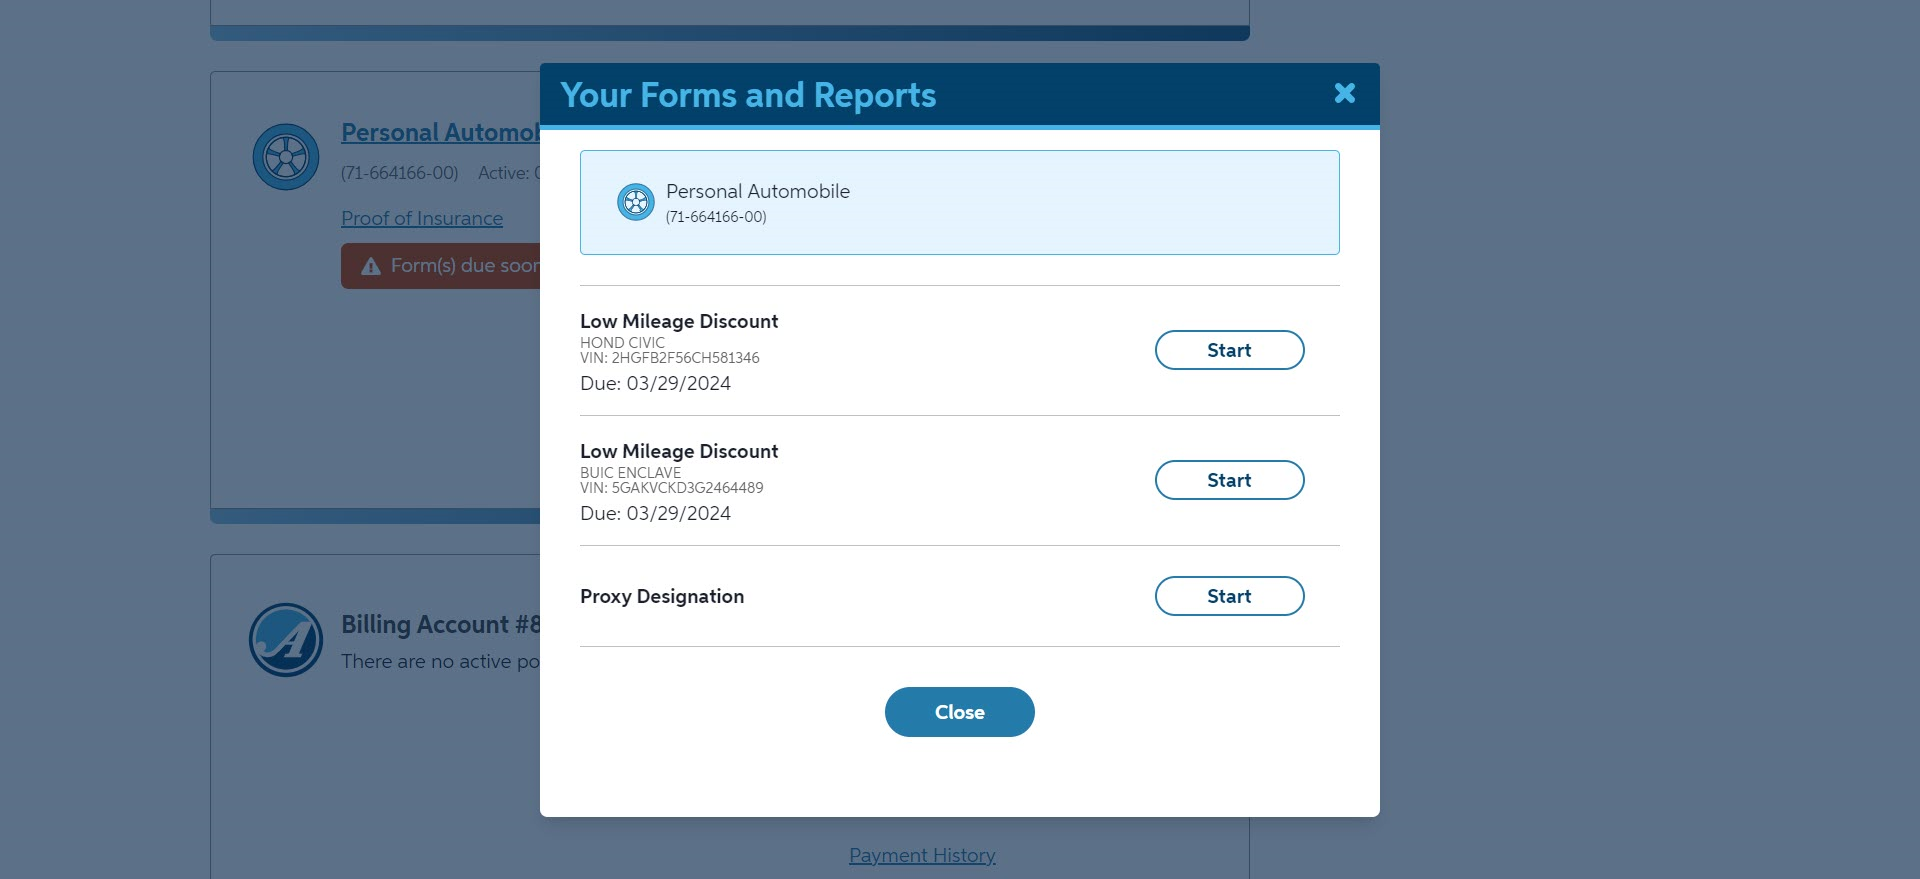 An image of the Forms and Reports page where a customer can start the Low Mileage Discount form.